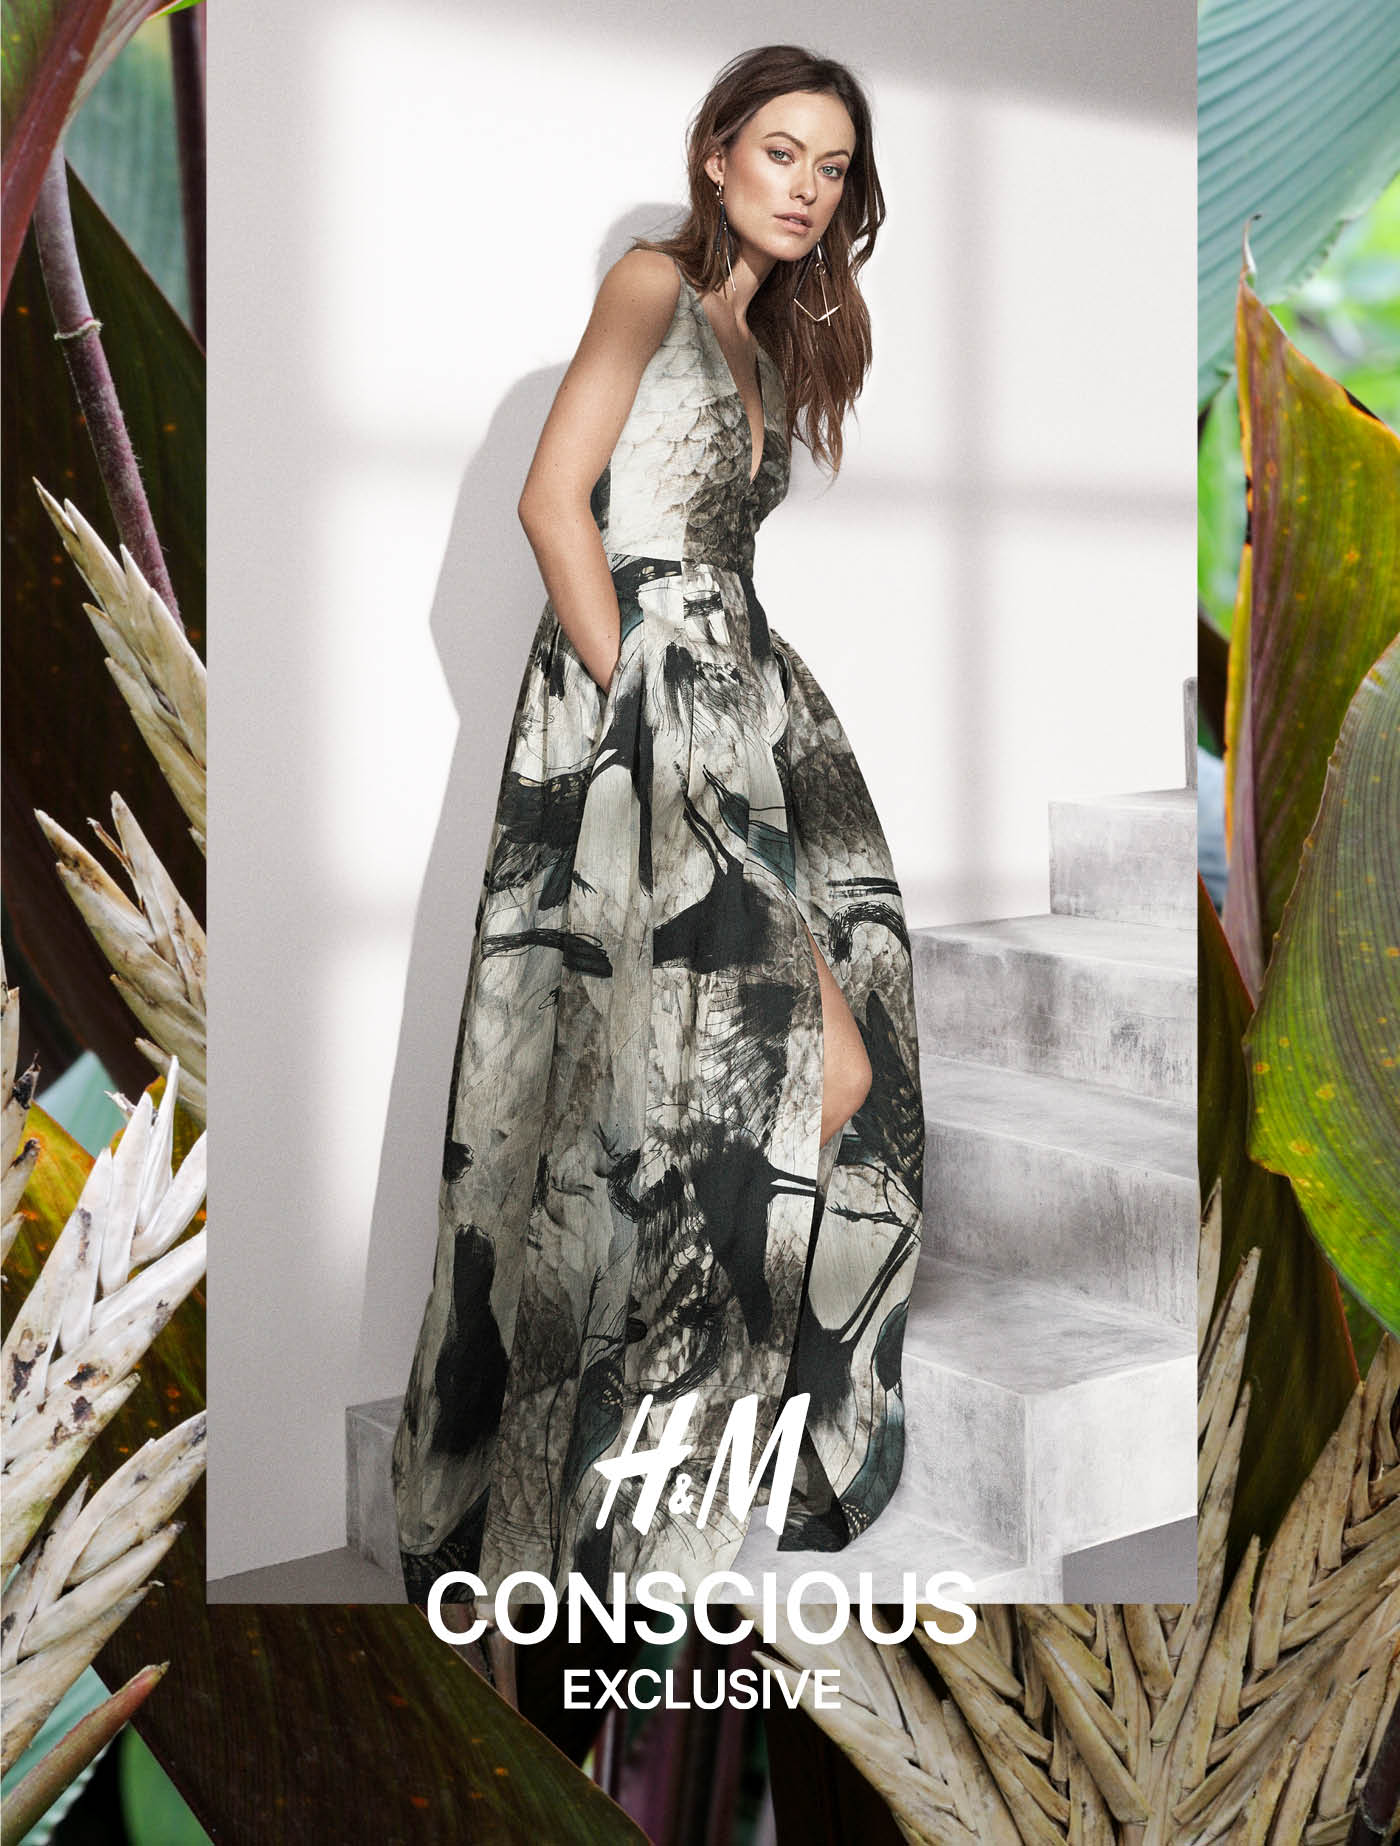 Worldwide launch today! Olivia Wilde for H&M Conscious